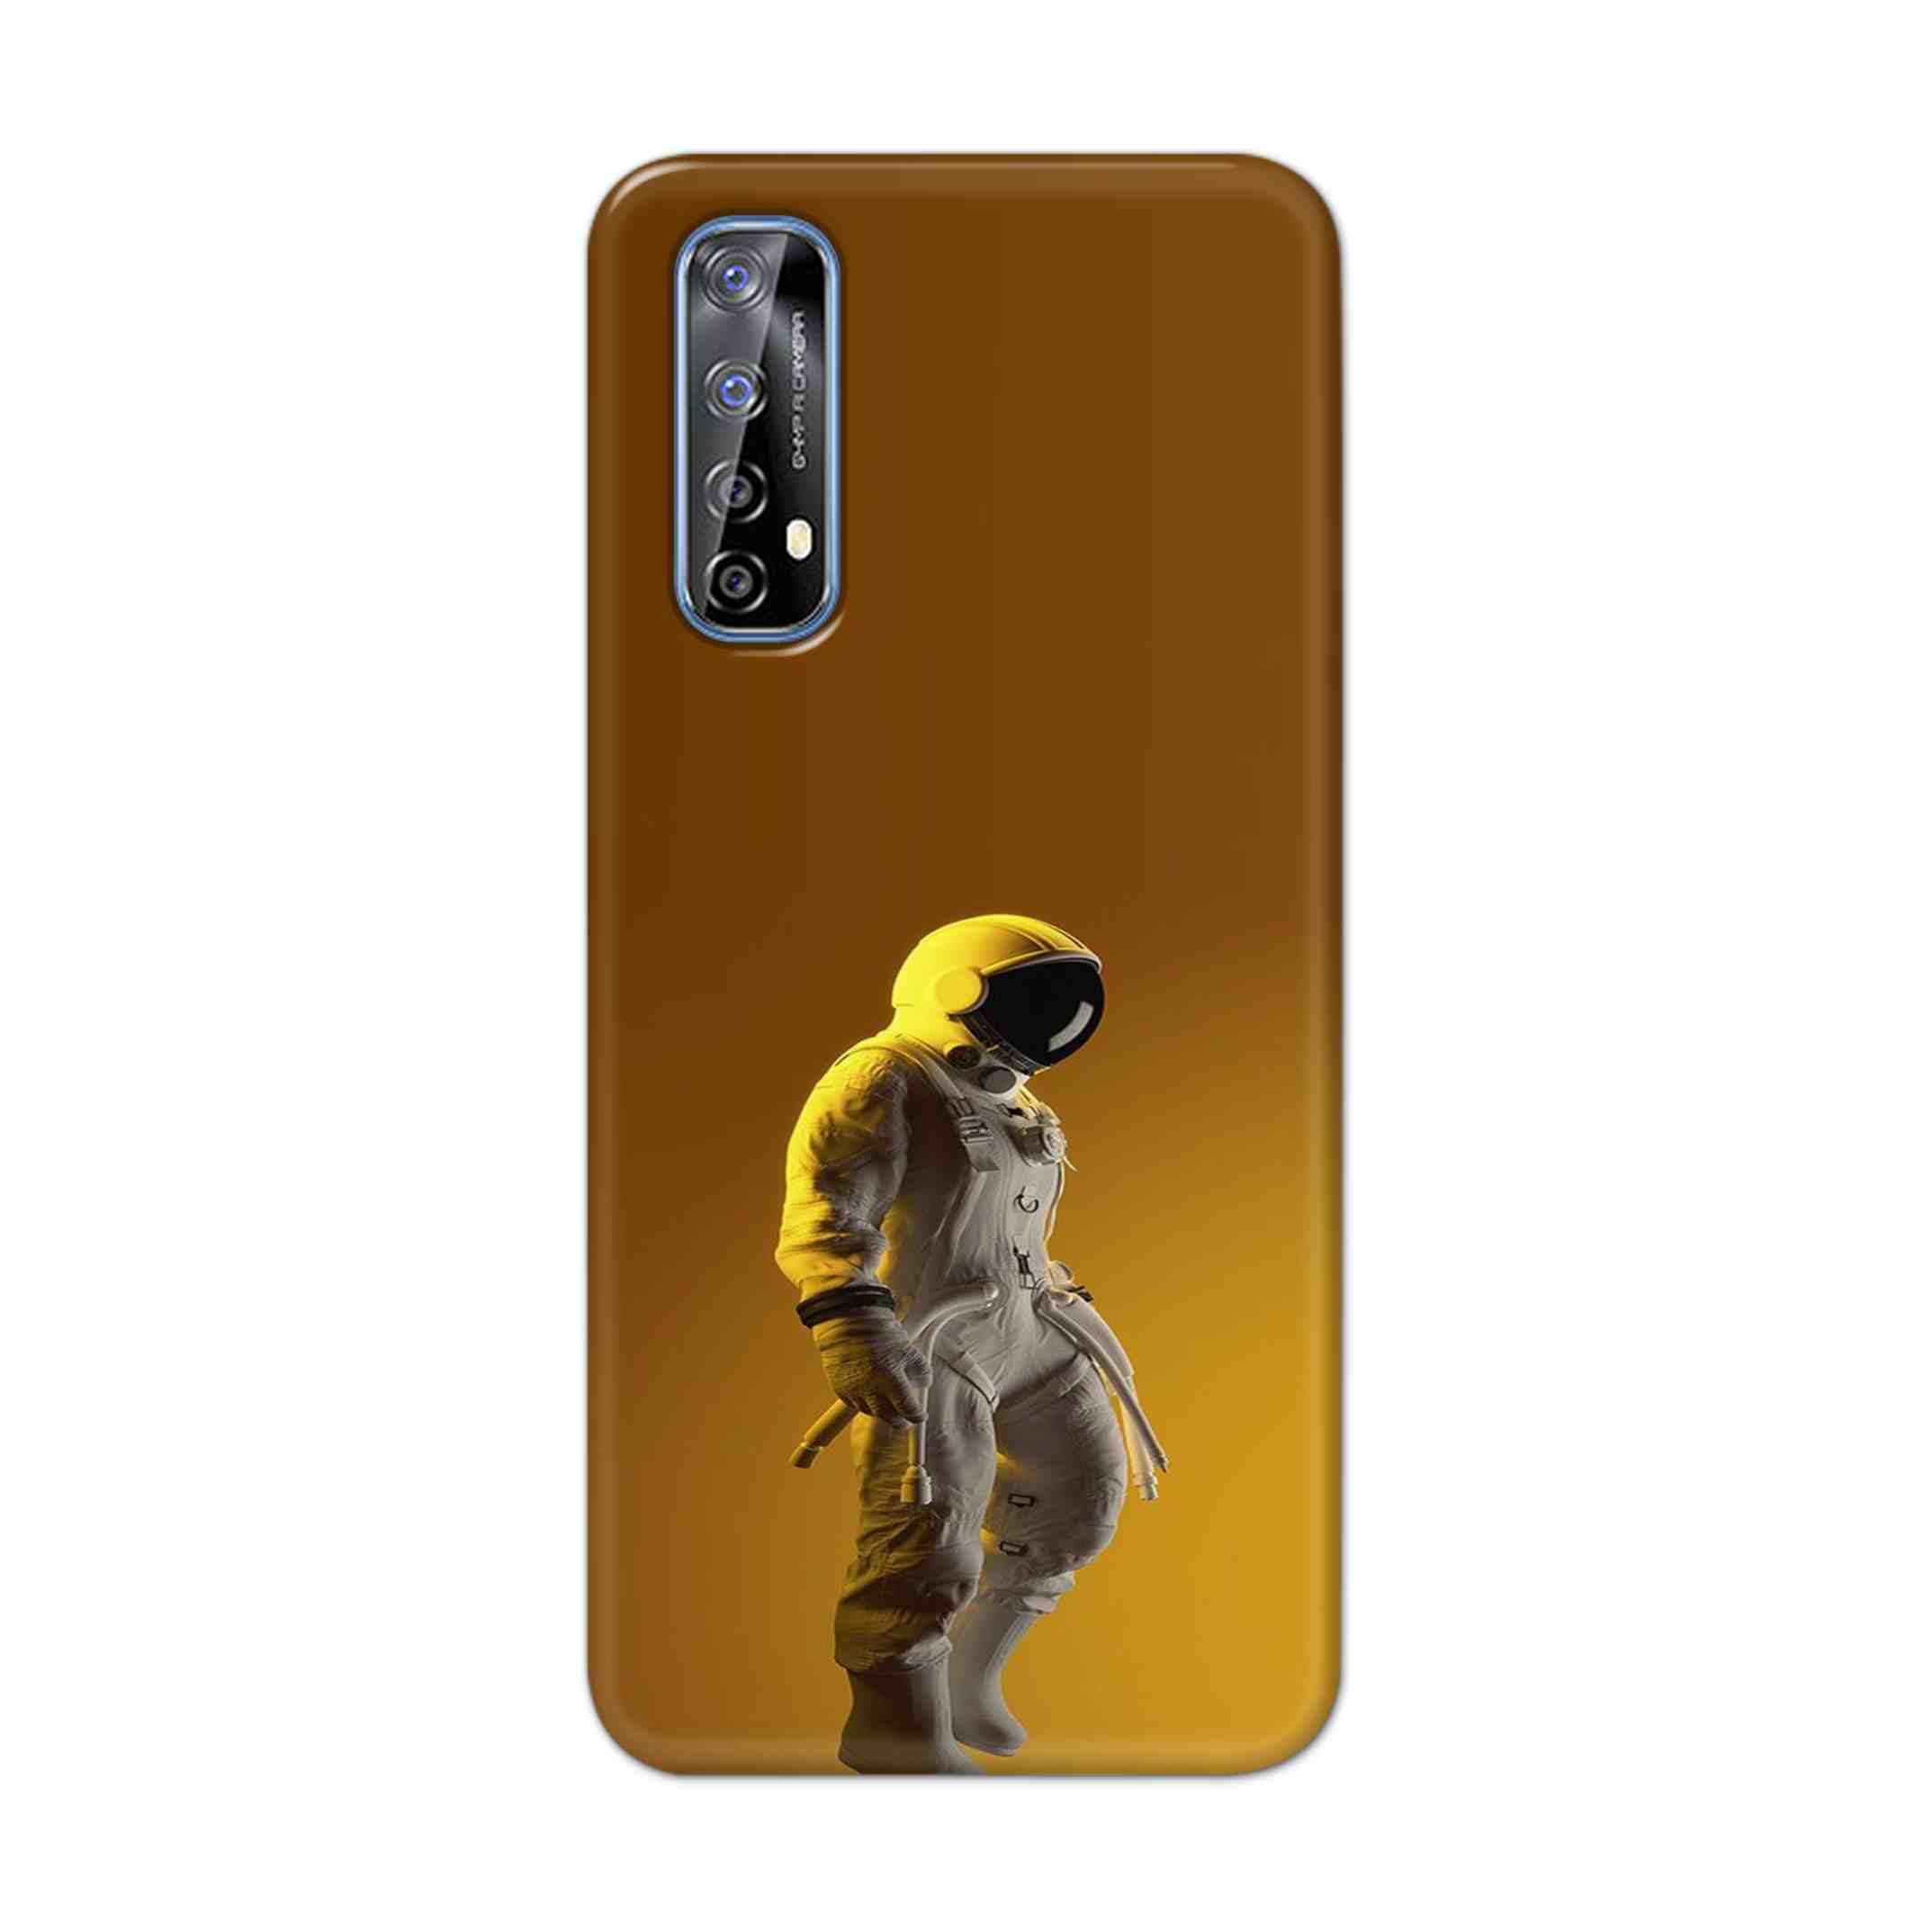 Buy Yellow Astronaut Hard Back Mobile Phone Case Cover For Realme 7 Online